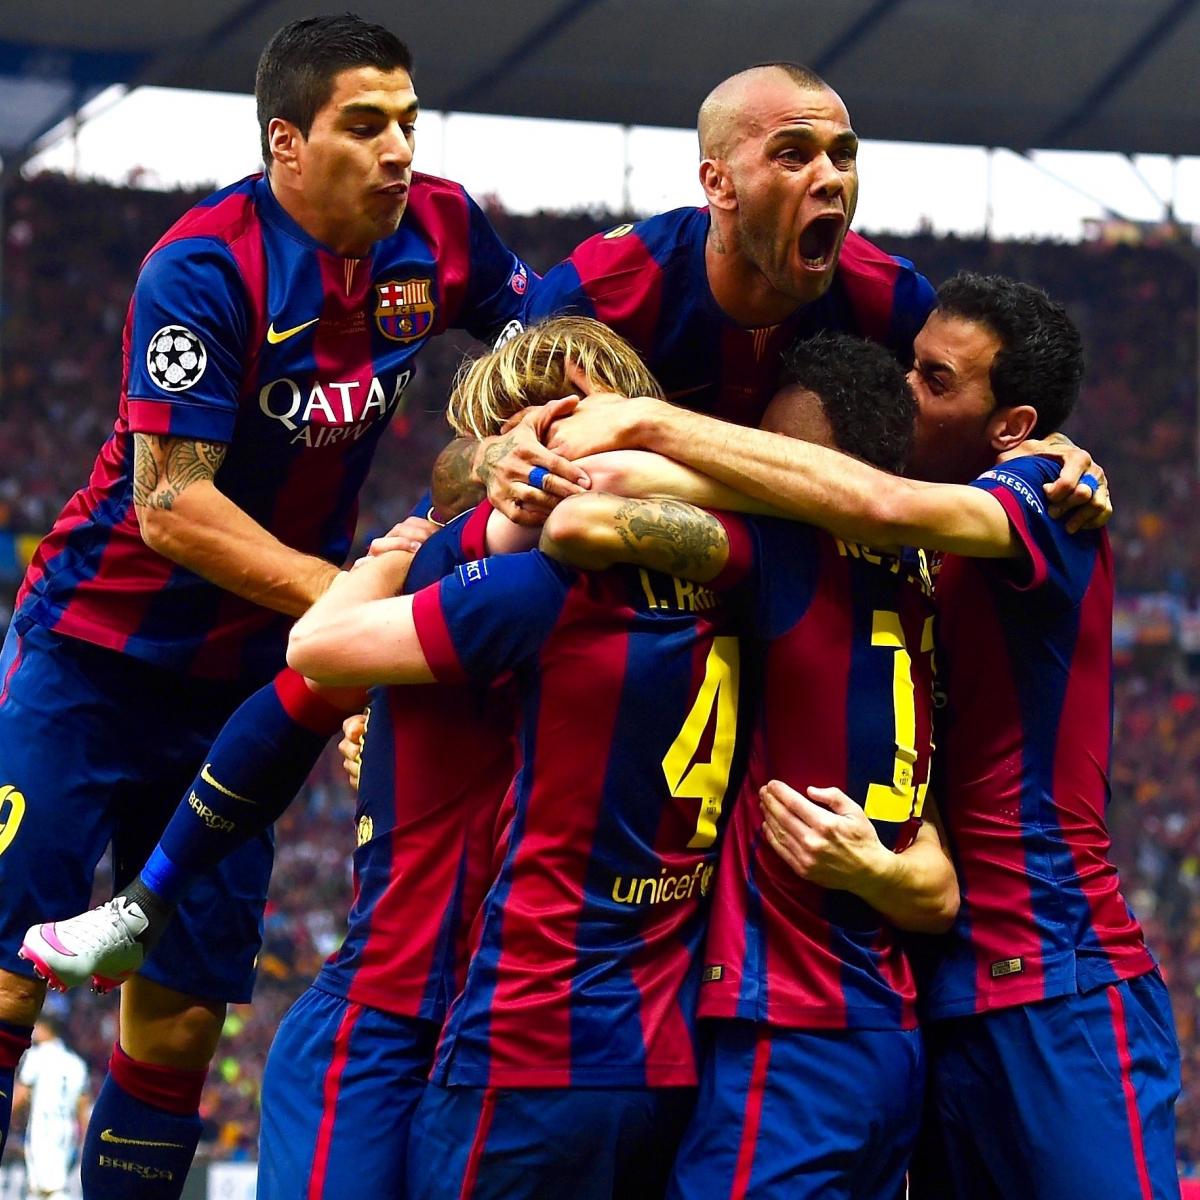 Juventus Vs Barcelona Live Score Highlights From 2015 Champions League Final Bleacher Report Latest News Videos And Highlights